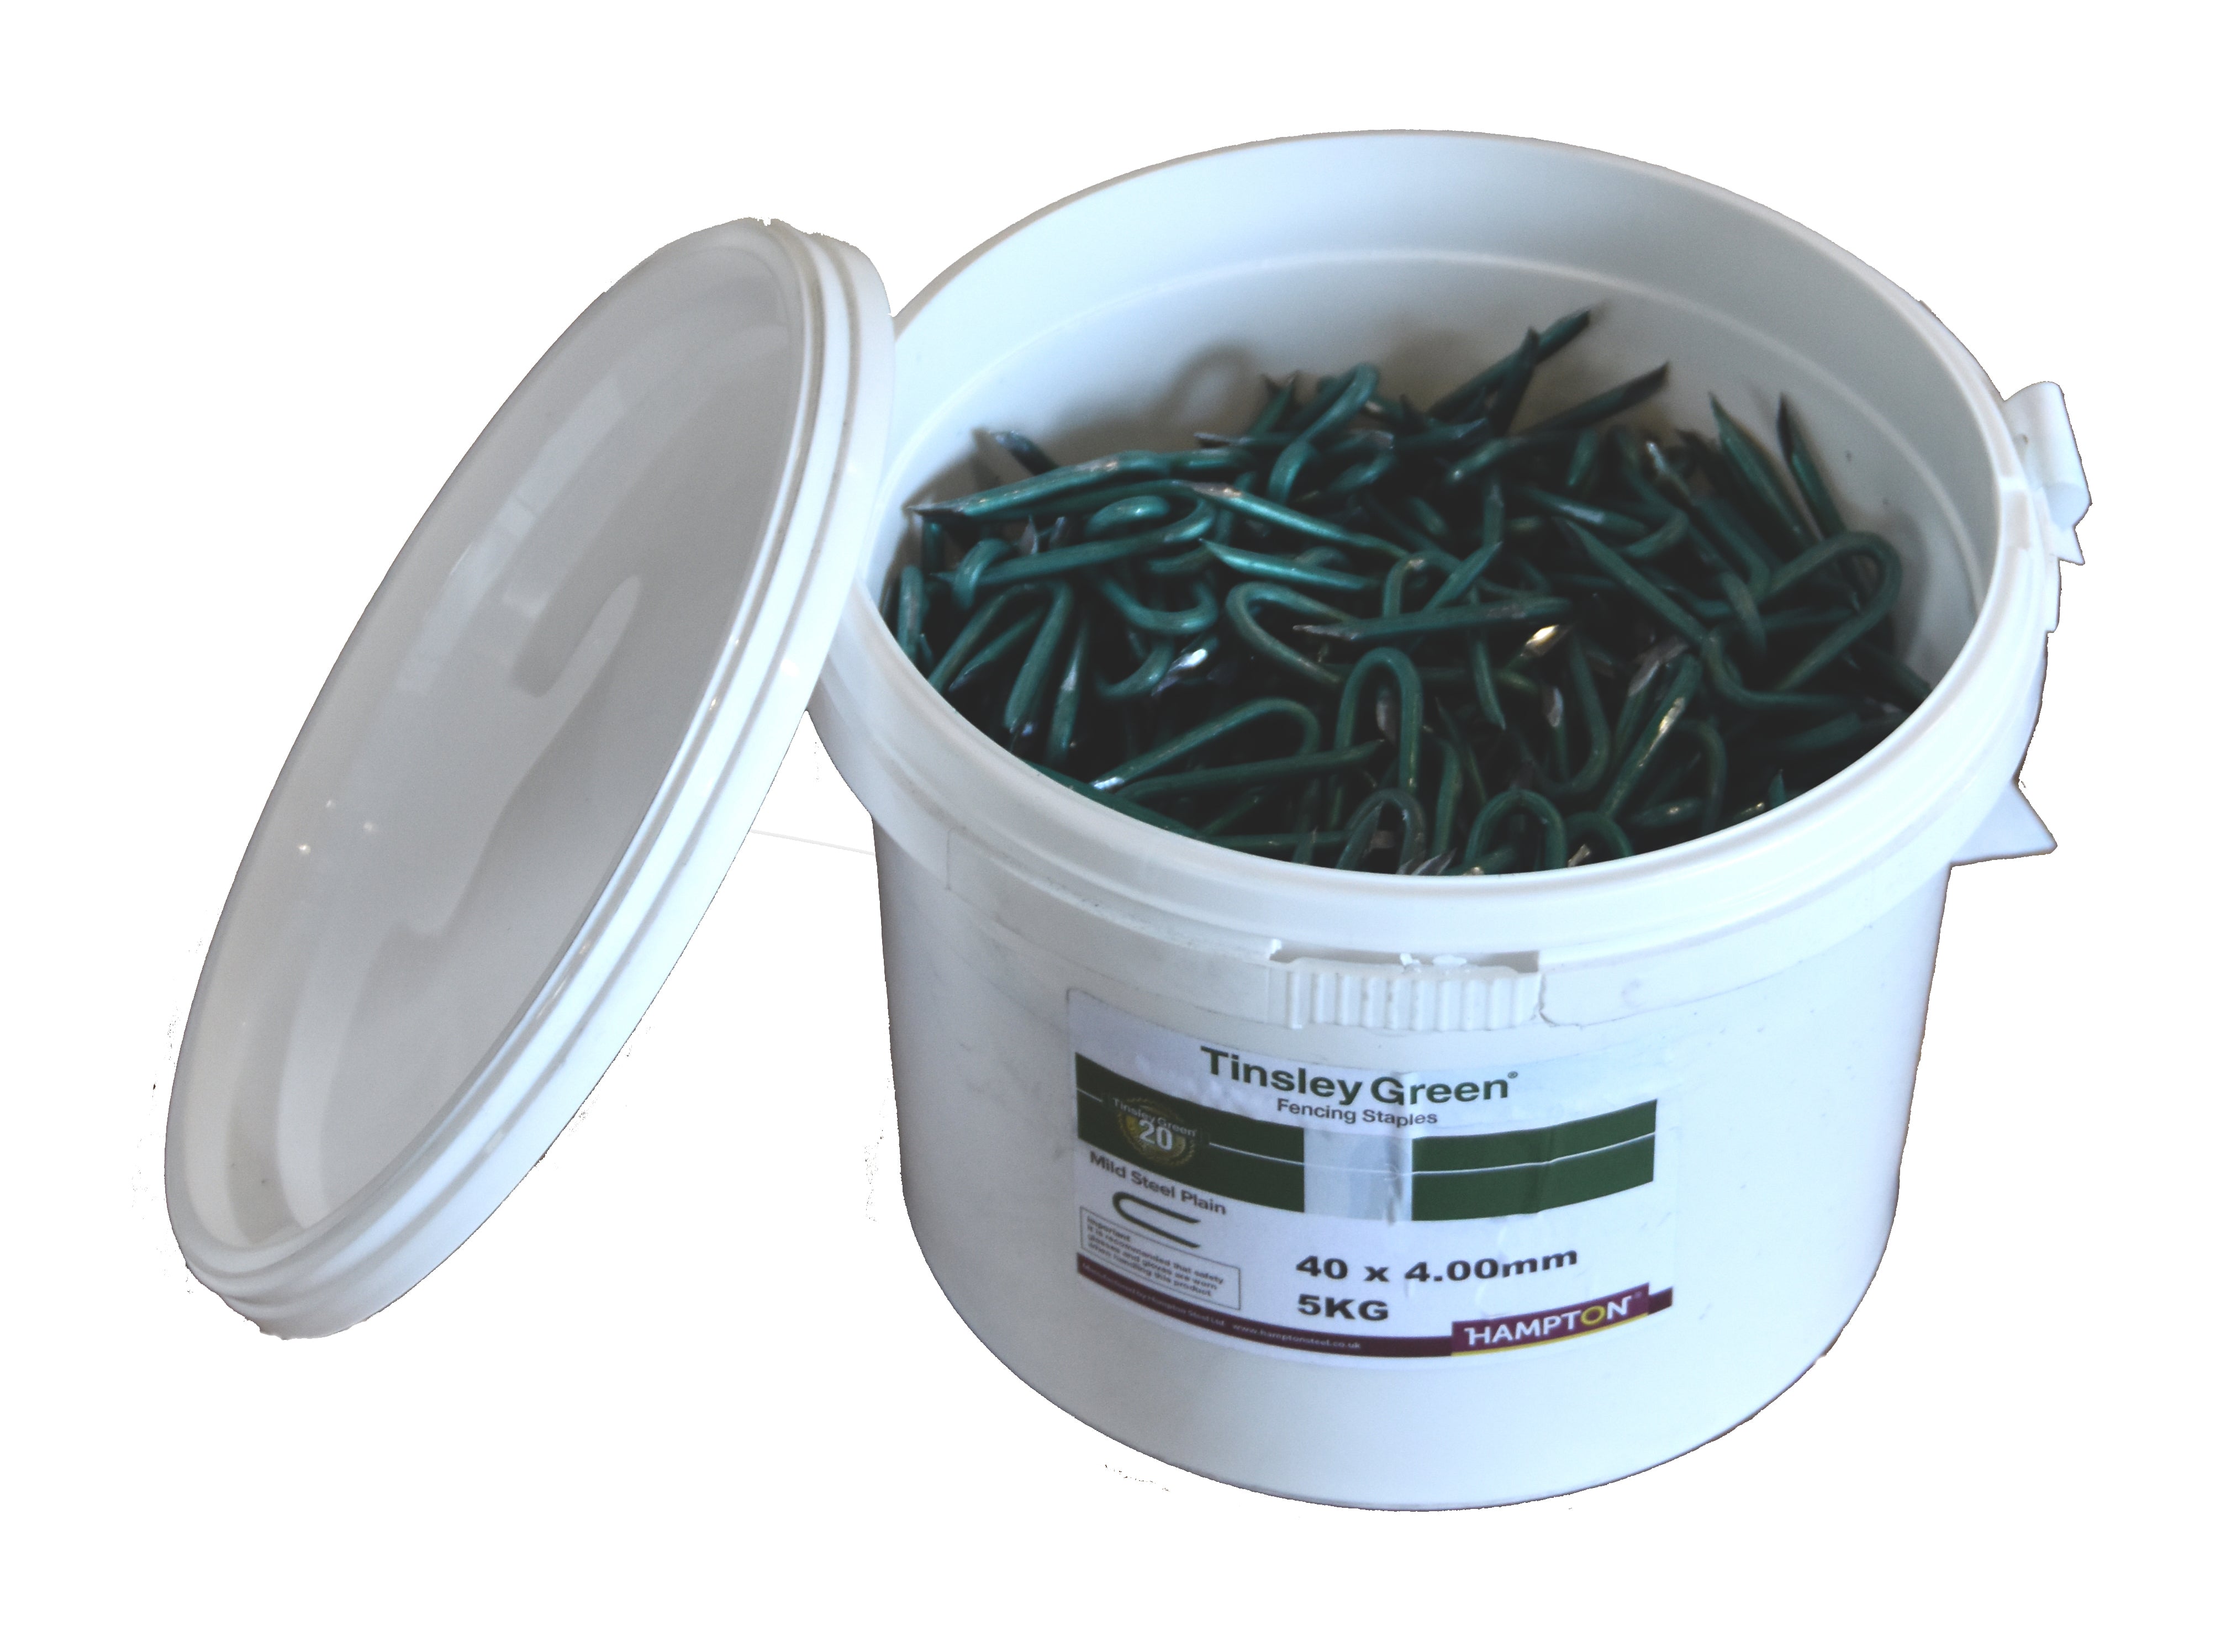 40mm X 4 TINSLEY GREEN  FENCING STAPLES  5kg